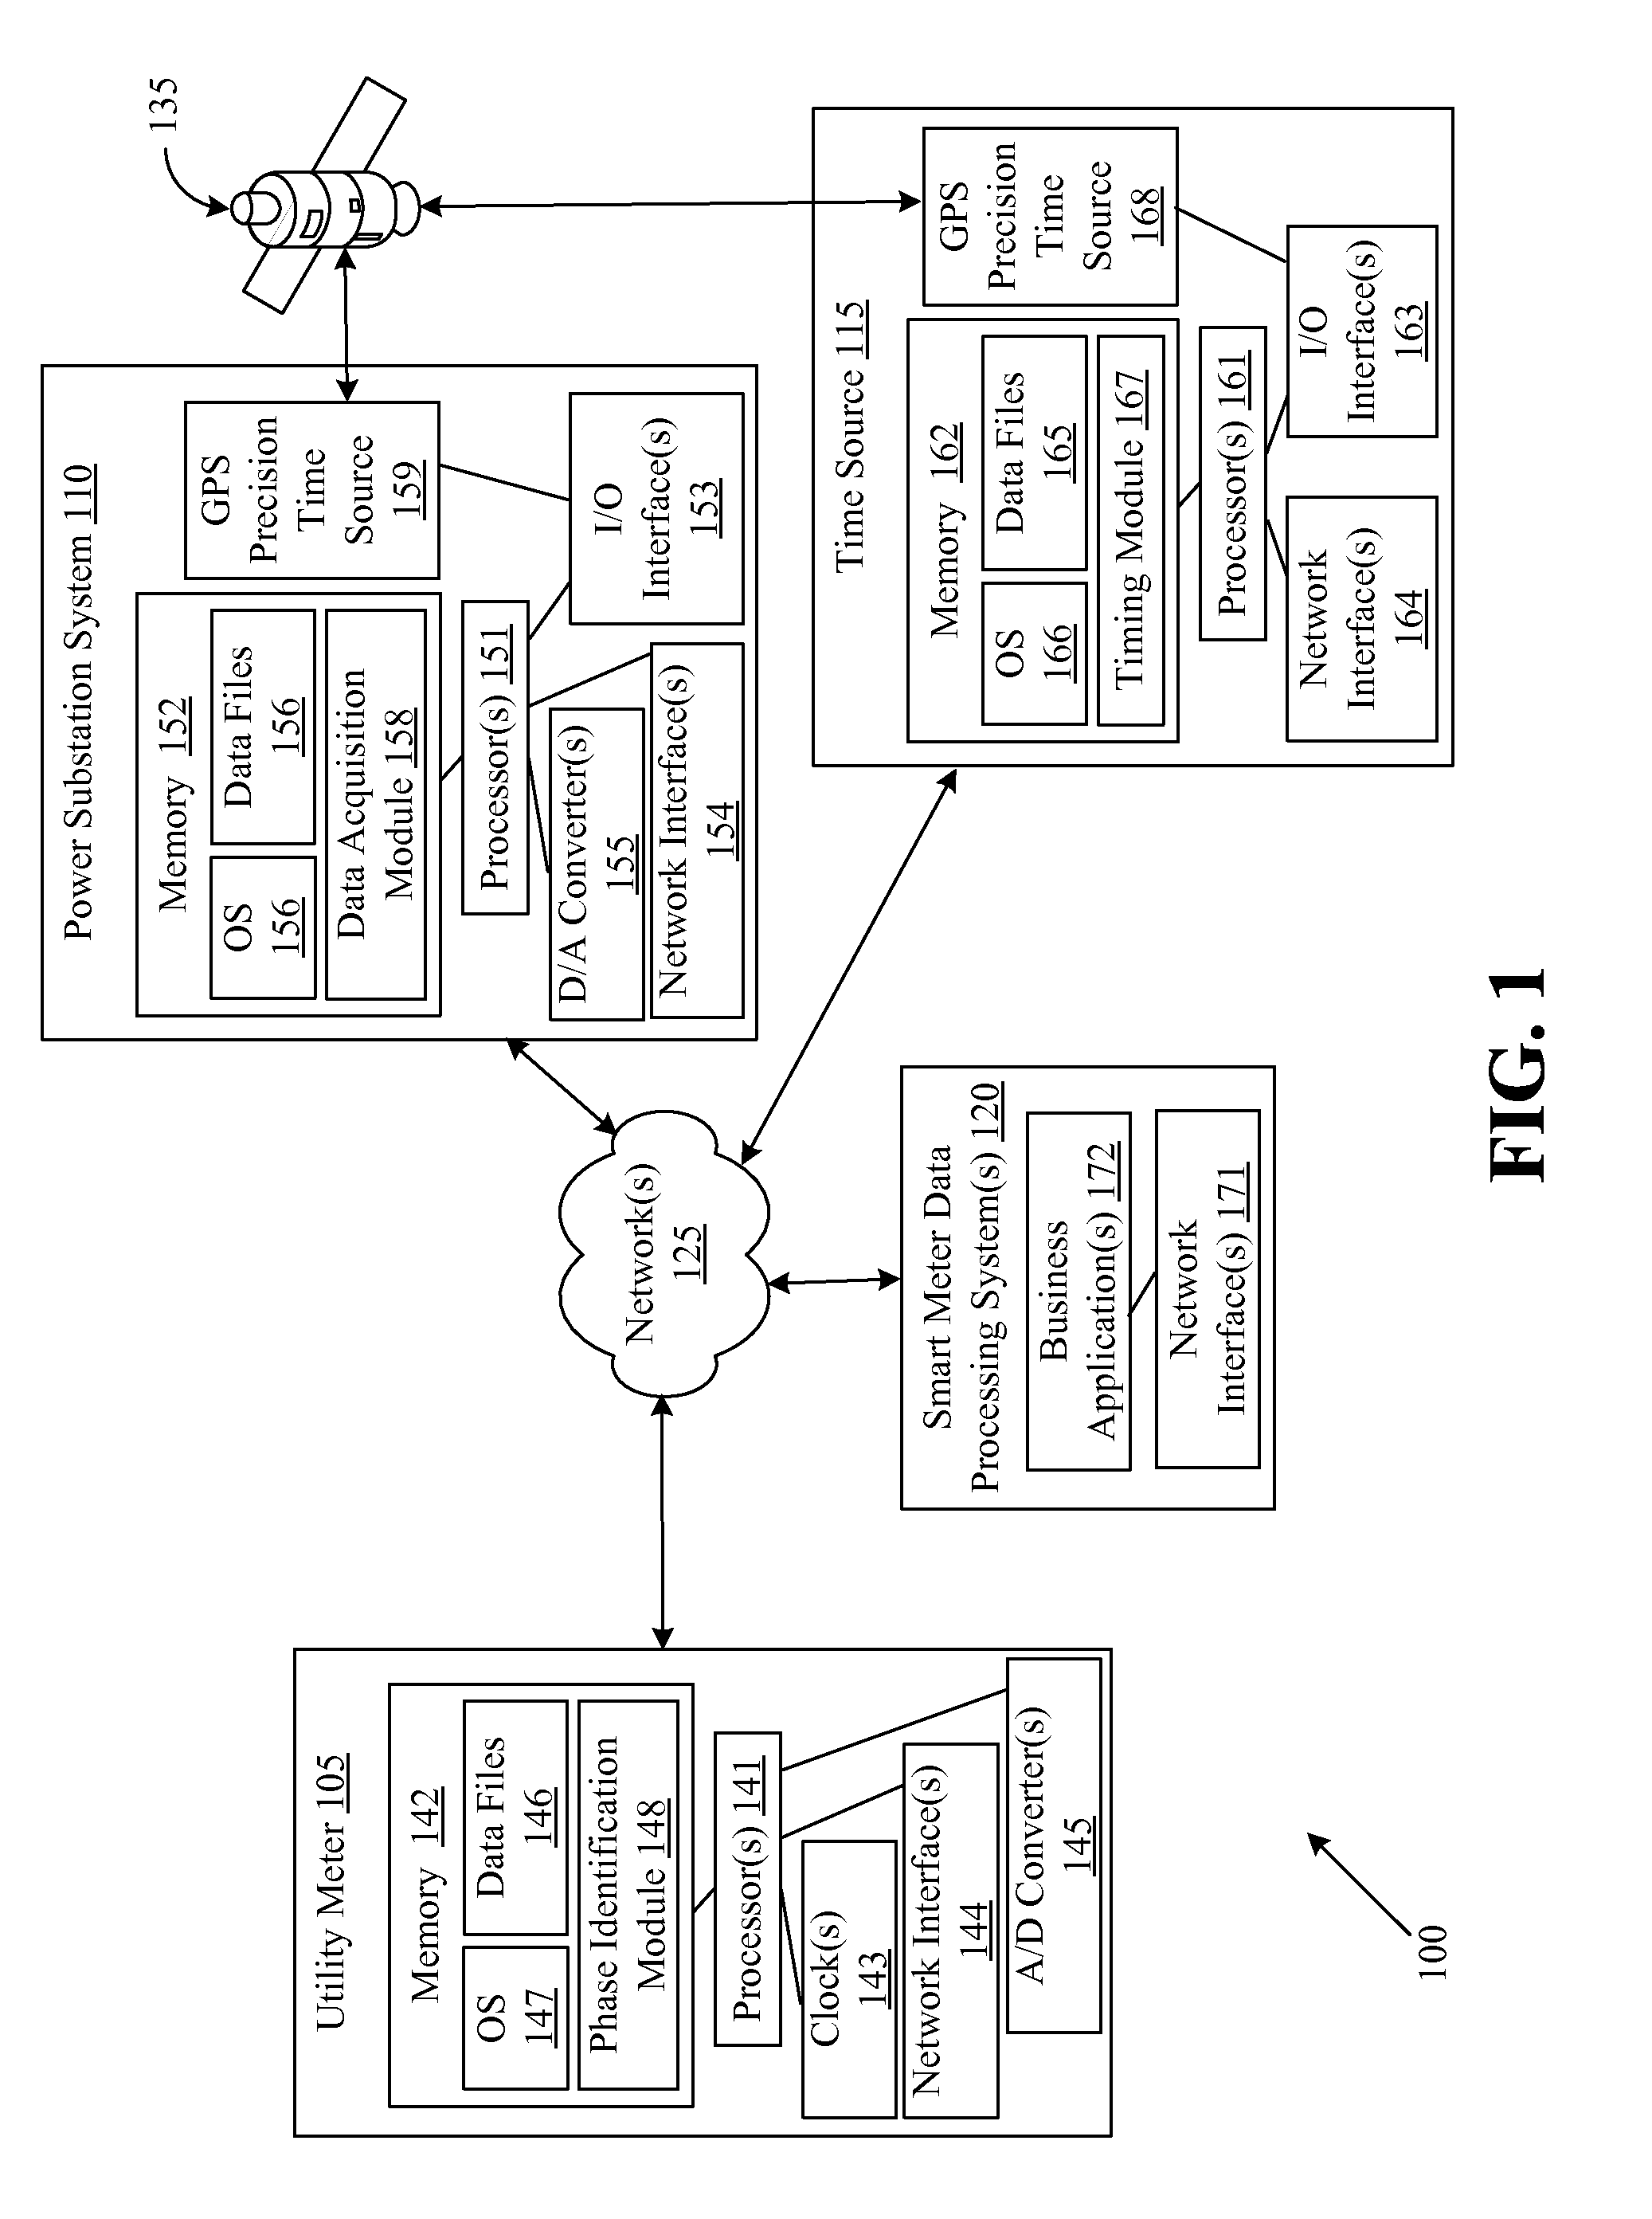 Systems, methods, and apparatus for utility meter phase identification